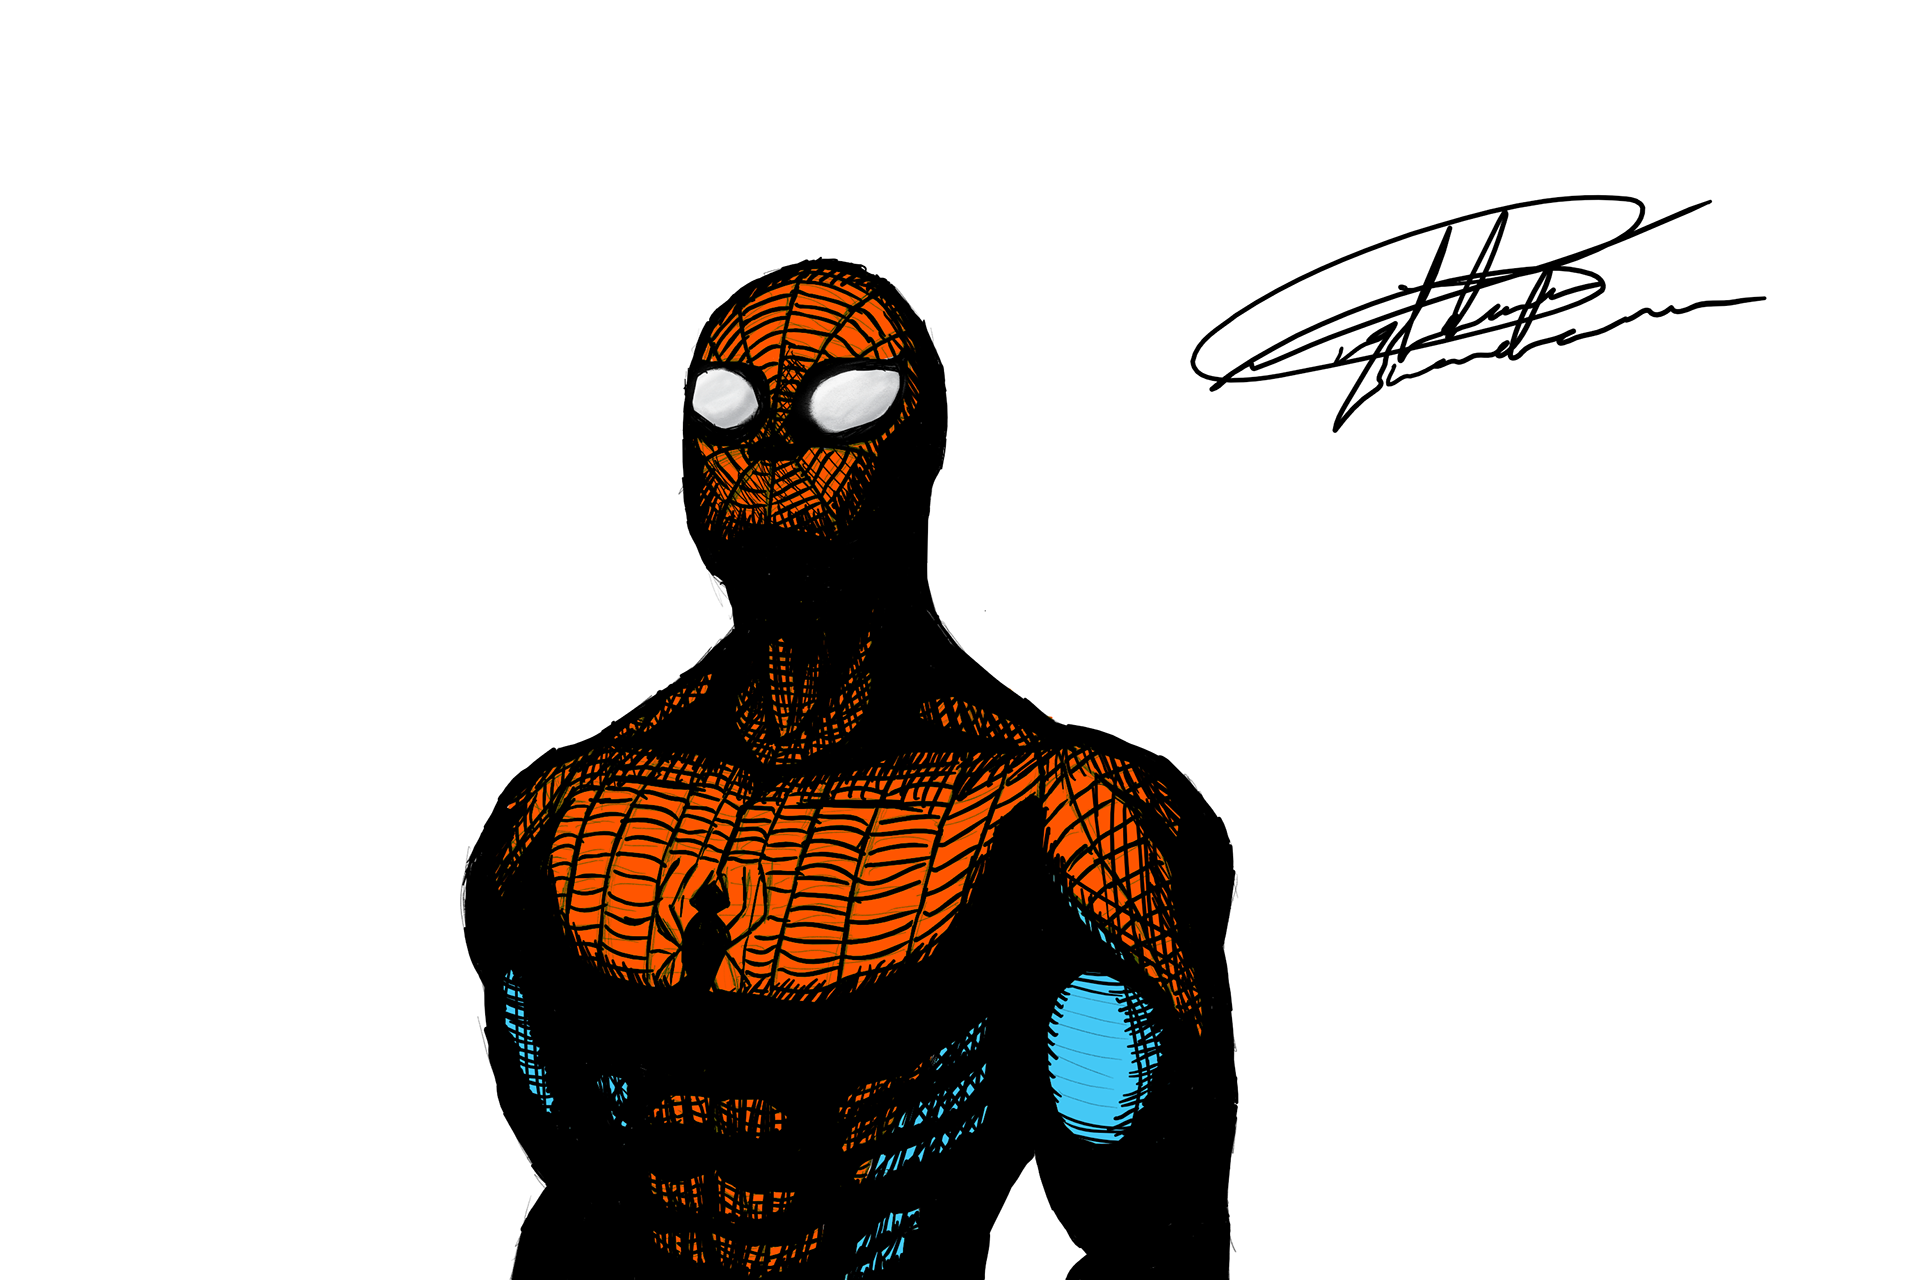 My favorite drawing of Spiderman I've ever done, and I've been drawing him since I was six or seven years old. I love how dramatic the lighting turned out in this, purely by accident. I was attempting to cross-hatch, but then I realized it blended well with the webbing of his suit, and I got this really gnarly effect that I love.